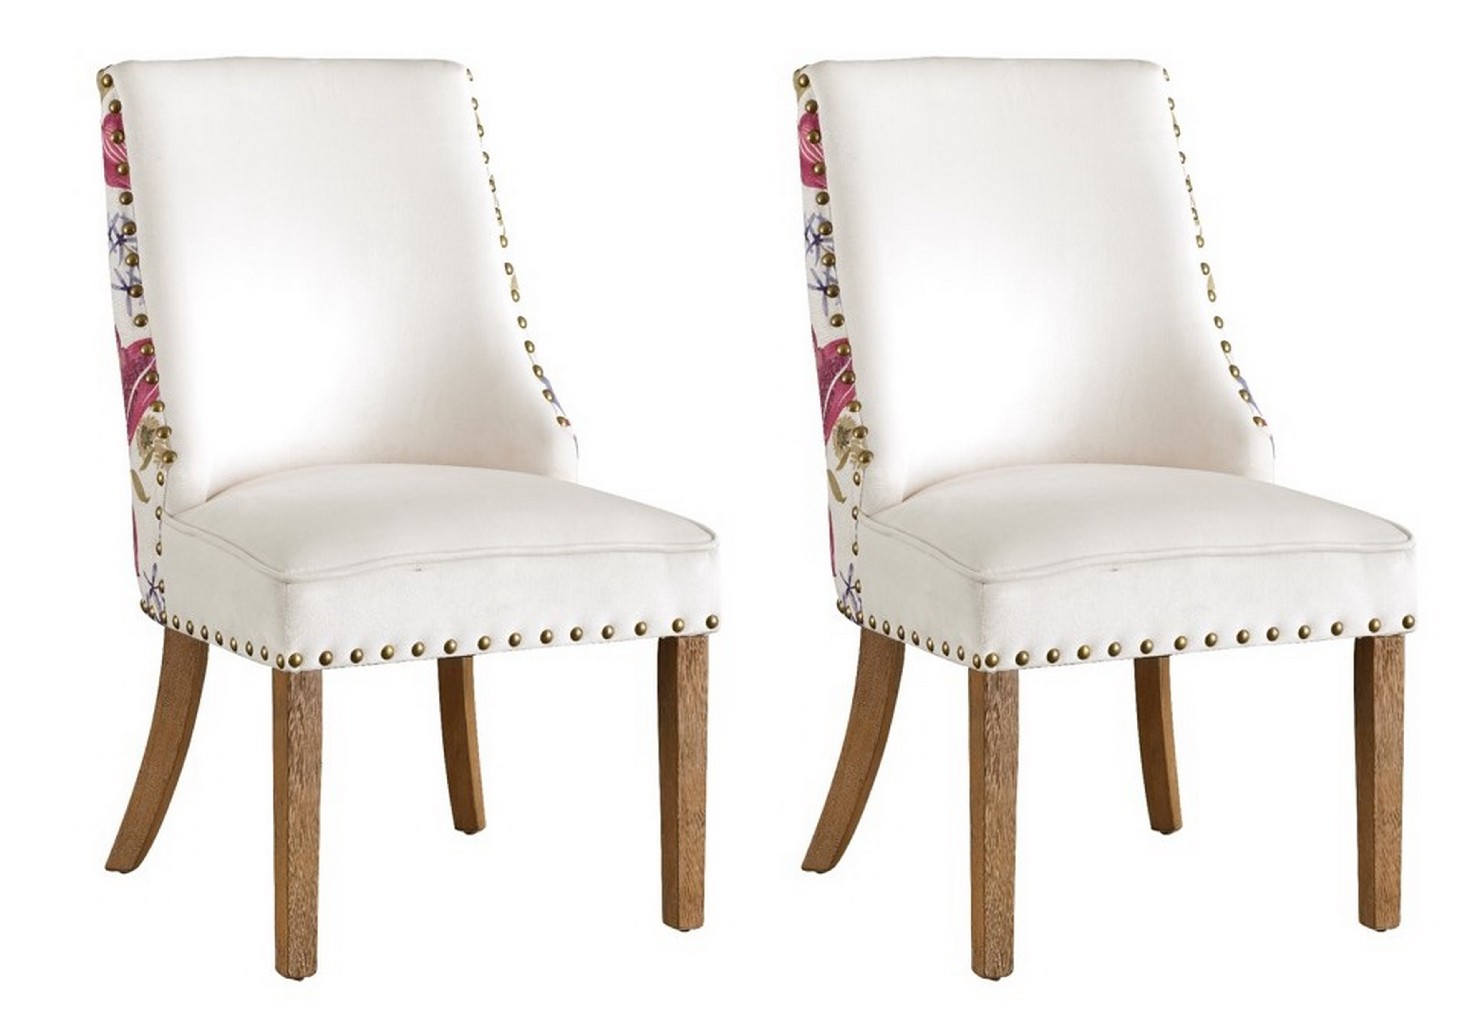 Set Of 2 Accent Dining Chairs - Coast To Coast Imports 48114